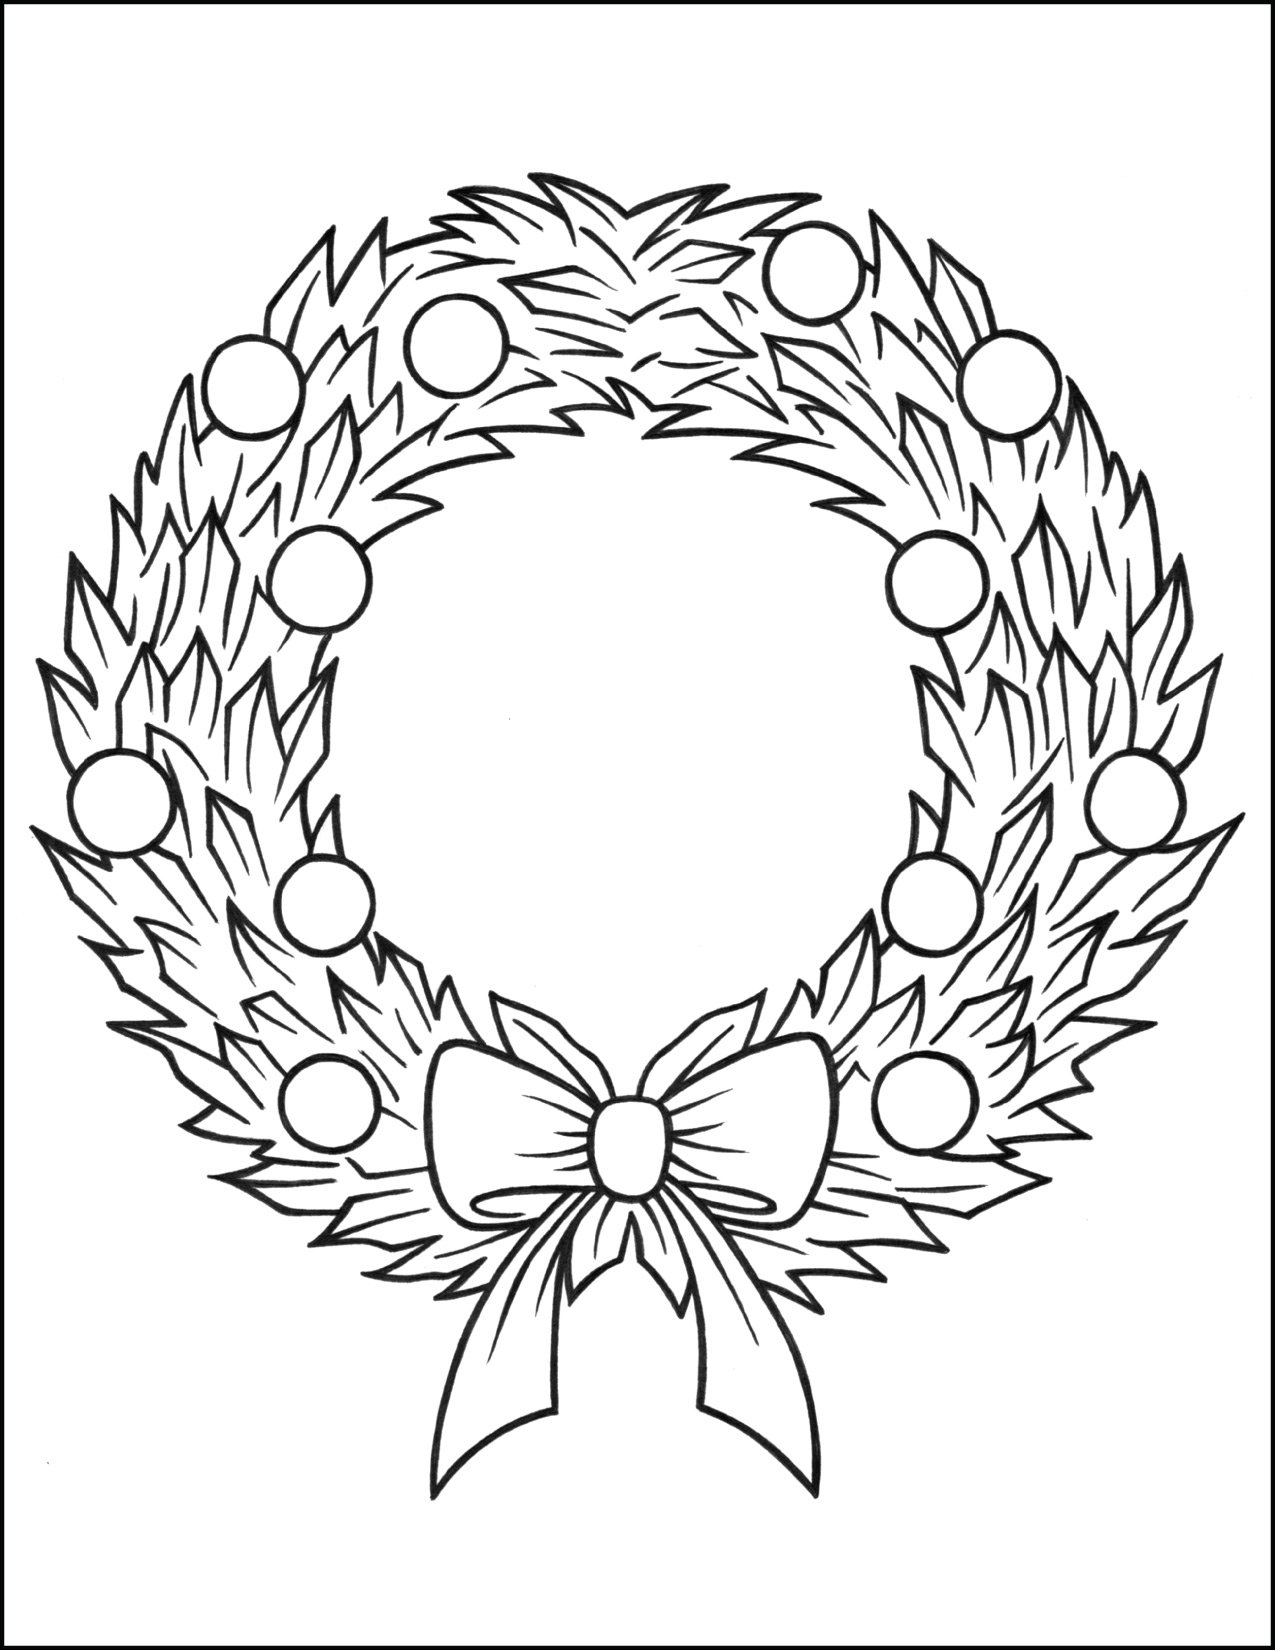 Printable Christmas Wreath with a Bowknot Coloring Page for kids.